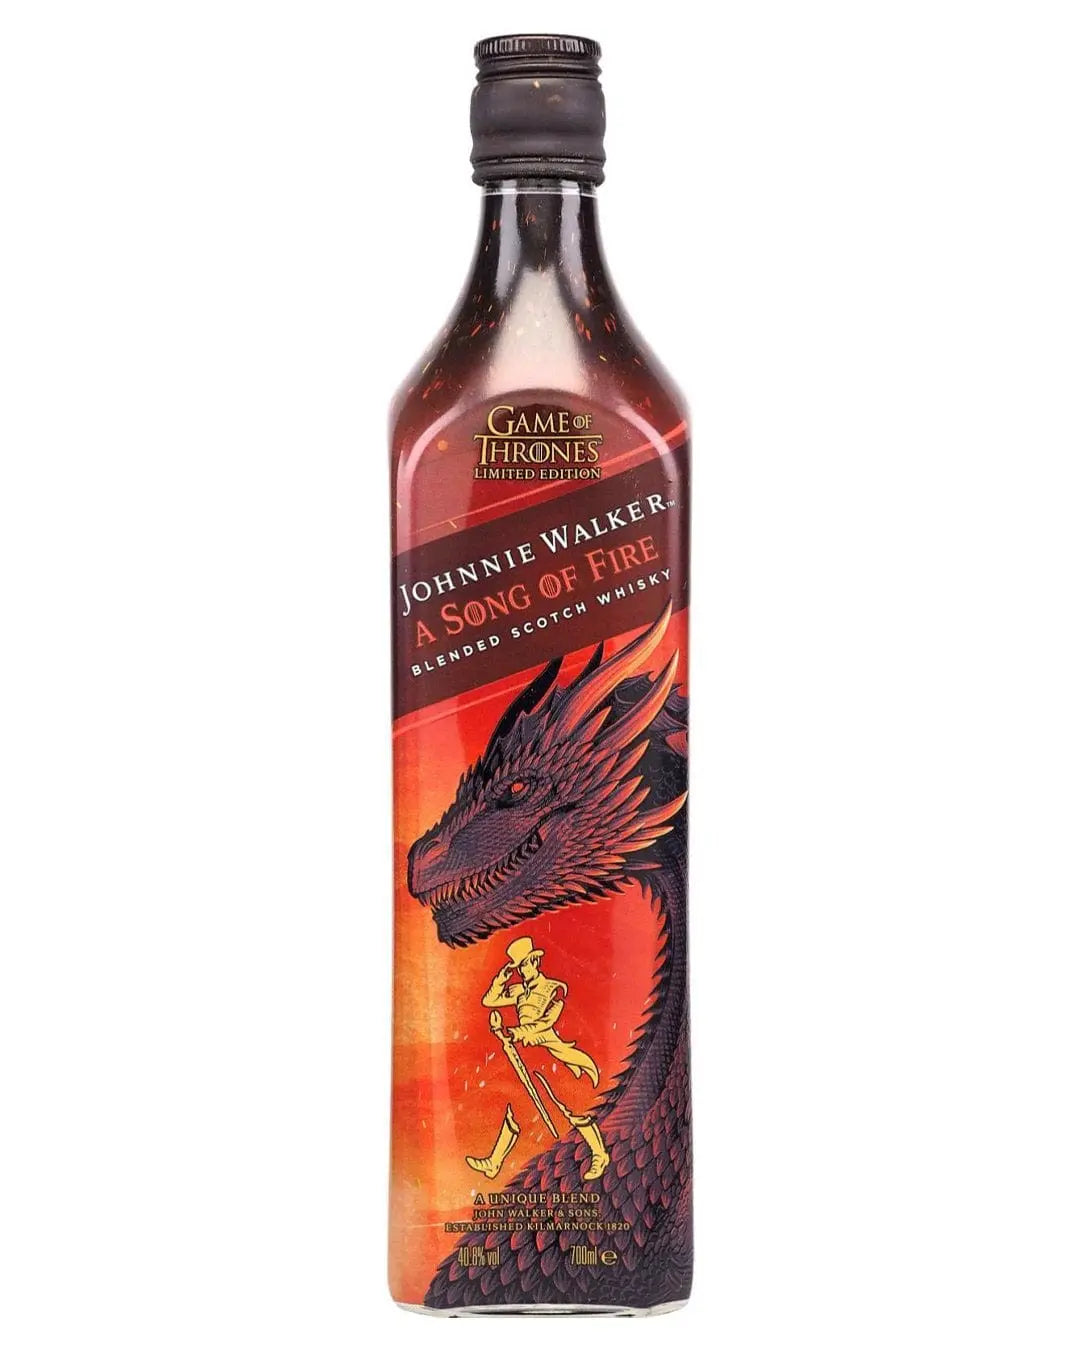 Johnnie Walker Song of Fire (Game of Thrones) Whisky, 70 cl Whisky 088076184114